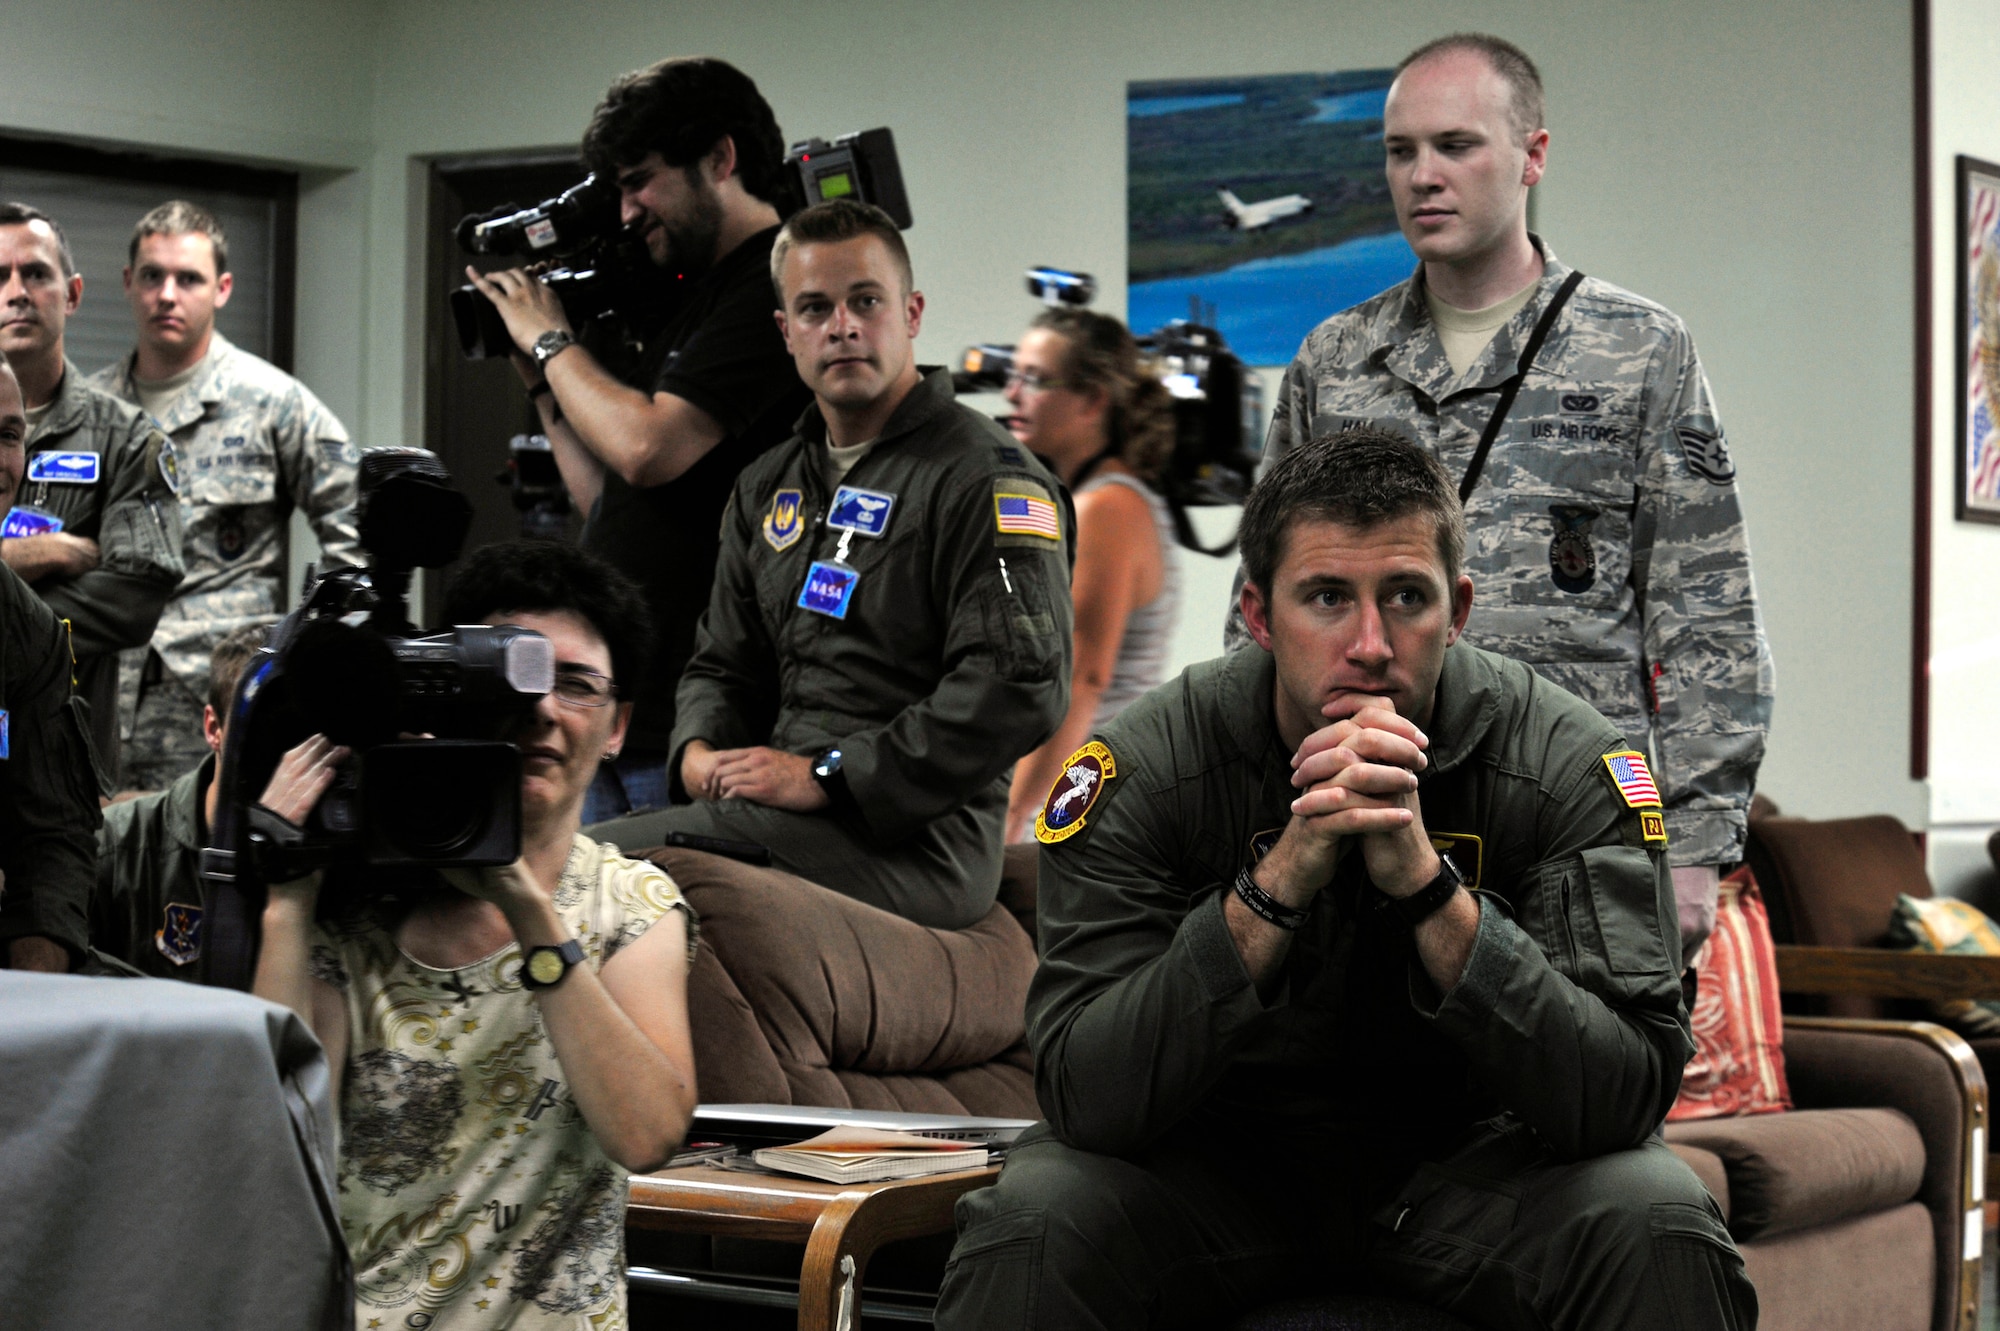 U.S. Air Force Airmen and members of the Spanish media stand-by and wait for the space shuttle launch, July 8, 2011, Zaragoza Air Base, Spain.  As space shuttle Atlantis makes it's final launch into orbit, personnel from DoD, NASA, and the Spanish Air Force work together to prepare for a possible emergency landing at the Transoceanic Abort Landing Site, Zaragoza Air Base, Spain. This particular TAL is one of three primary landing sites within U.S. Air Forces Europe, and this is the 135th mission the U.S. military has supported.  (U.S. Air Force photo by Tech. Sgt. Chenzira Mallory)